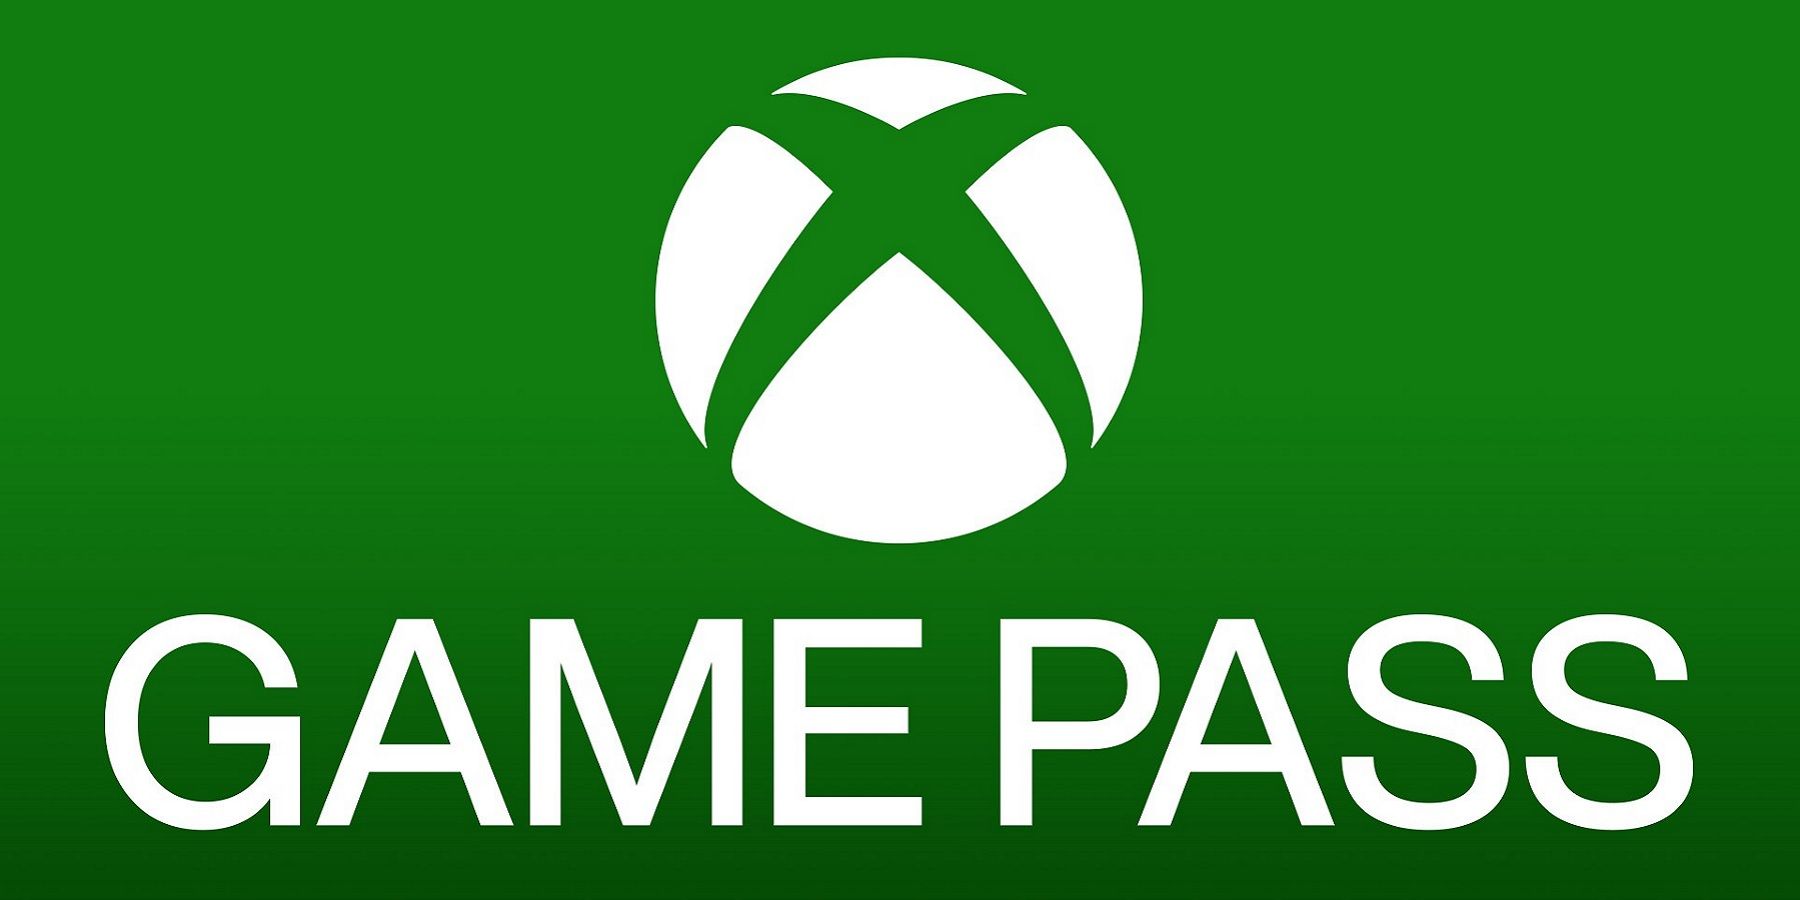 Xbox Game Pass Adds 5 New Games Today, Including 2 Day One Releases